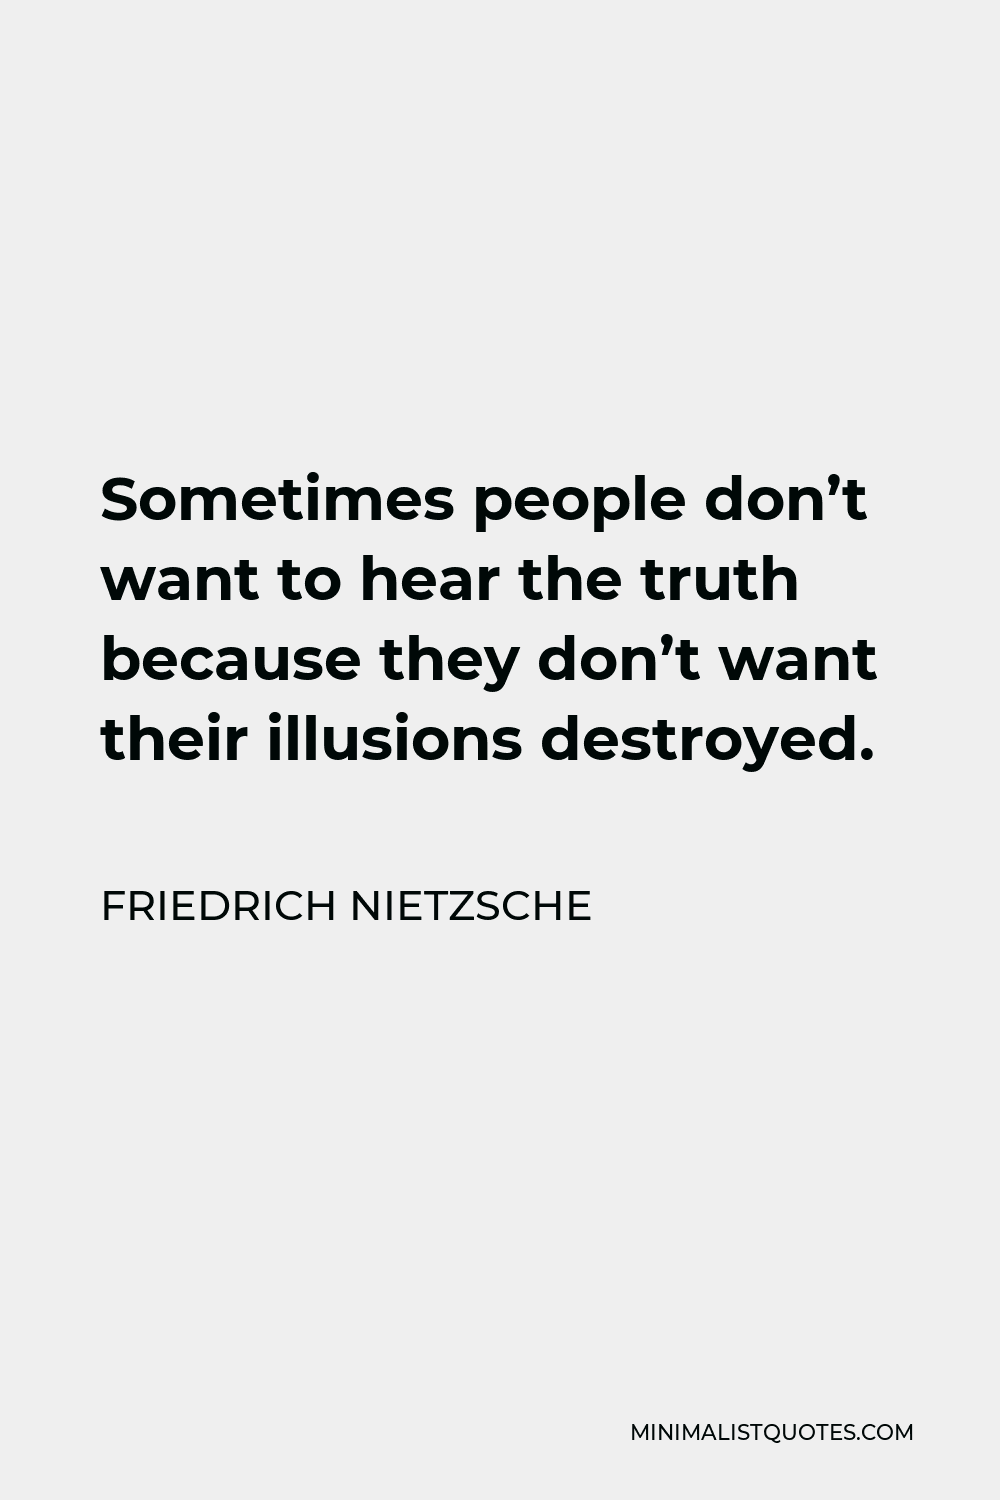 Friedrich Nietzsche Quote - Sometimes people don’t want to hear the truth because they don’t want their illusions destroyed.